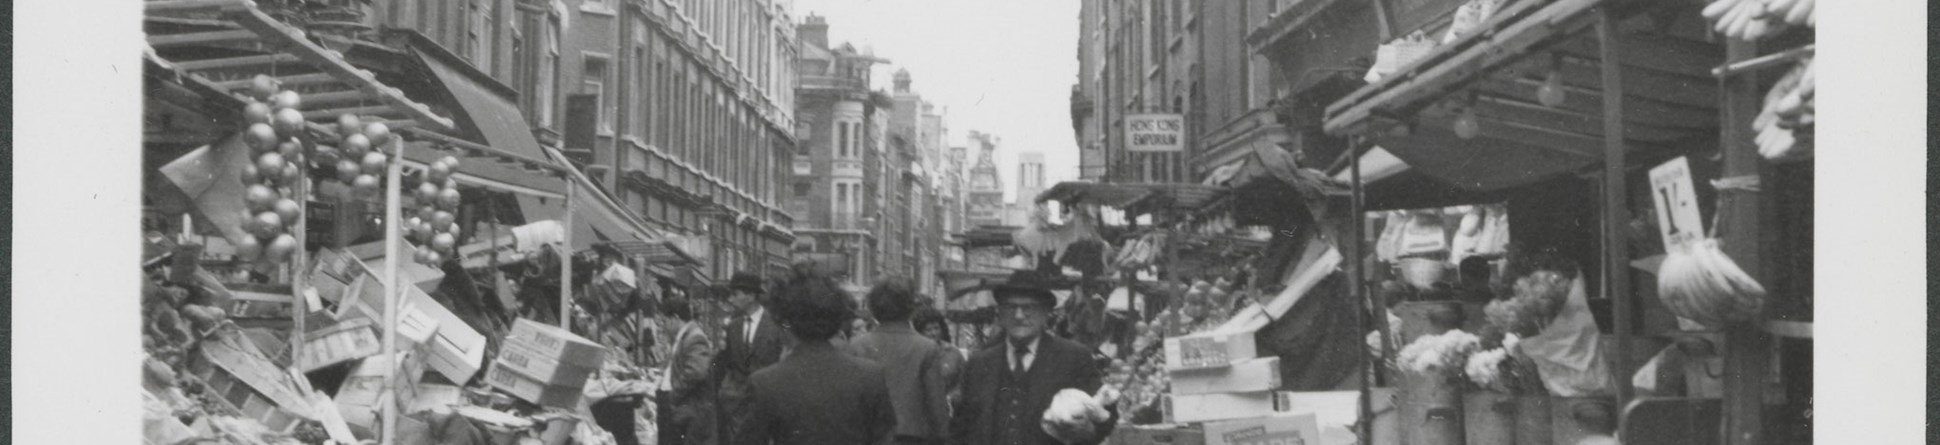 Black and white photograph of an urban street scene featuring people walking in a road flanked by market stalls set out in front of rows of stone-fronted buildings of multiple storeys. 